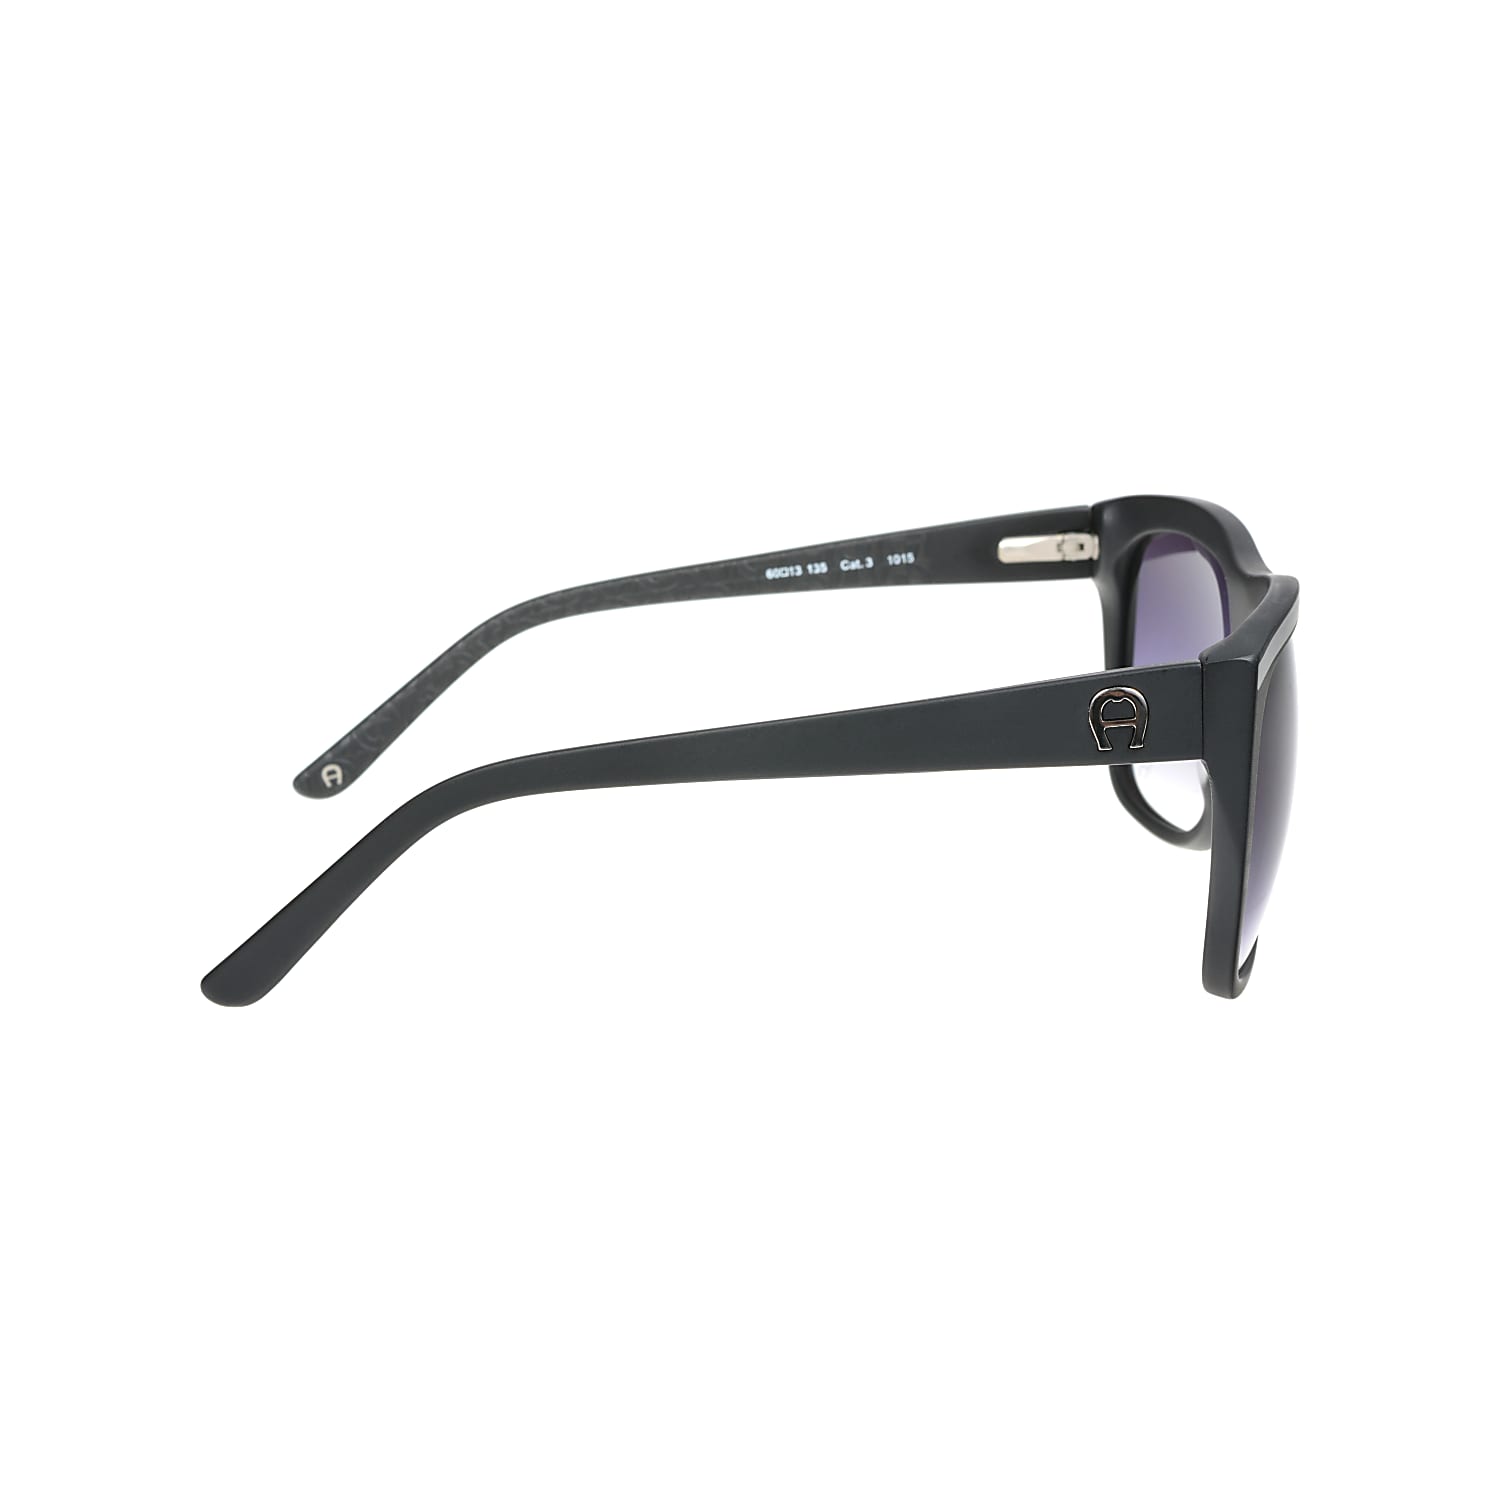 Unisex sunglass-style in a sporty look